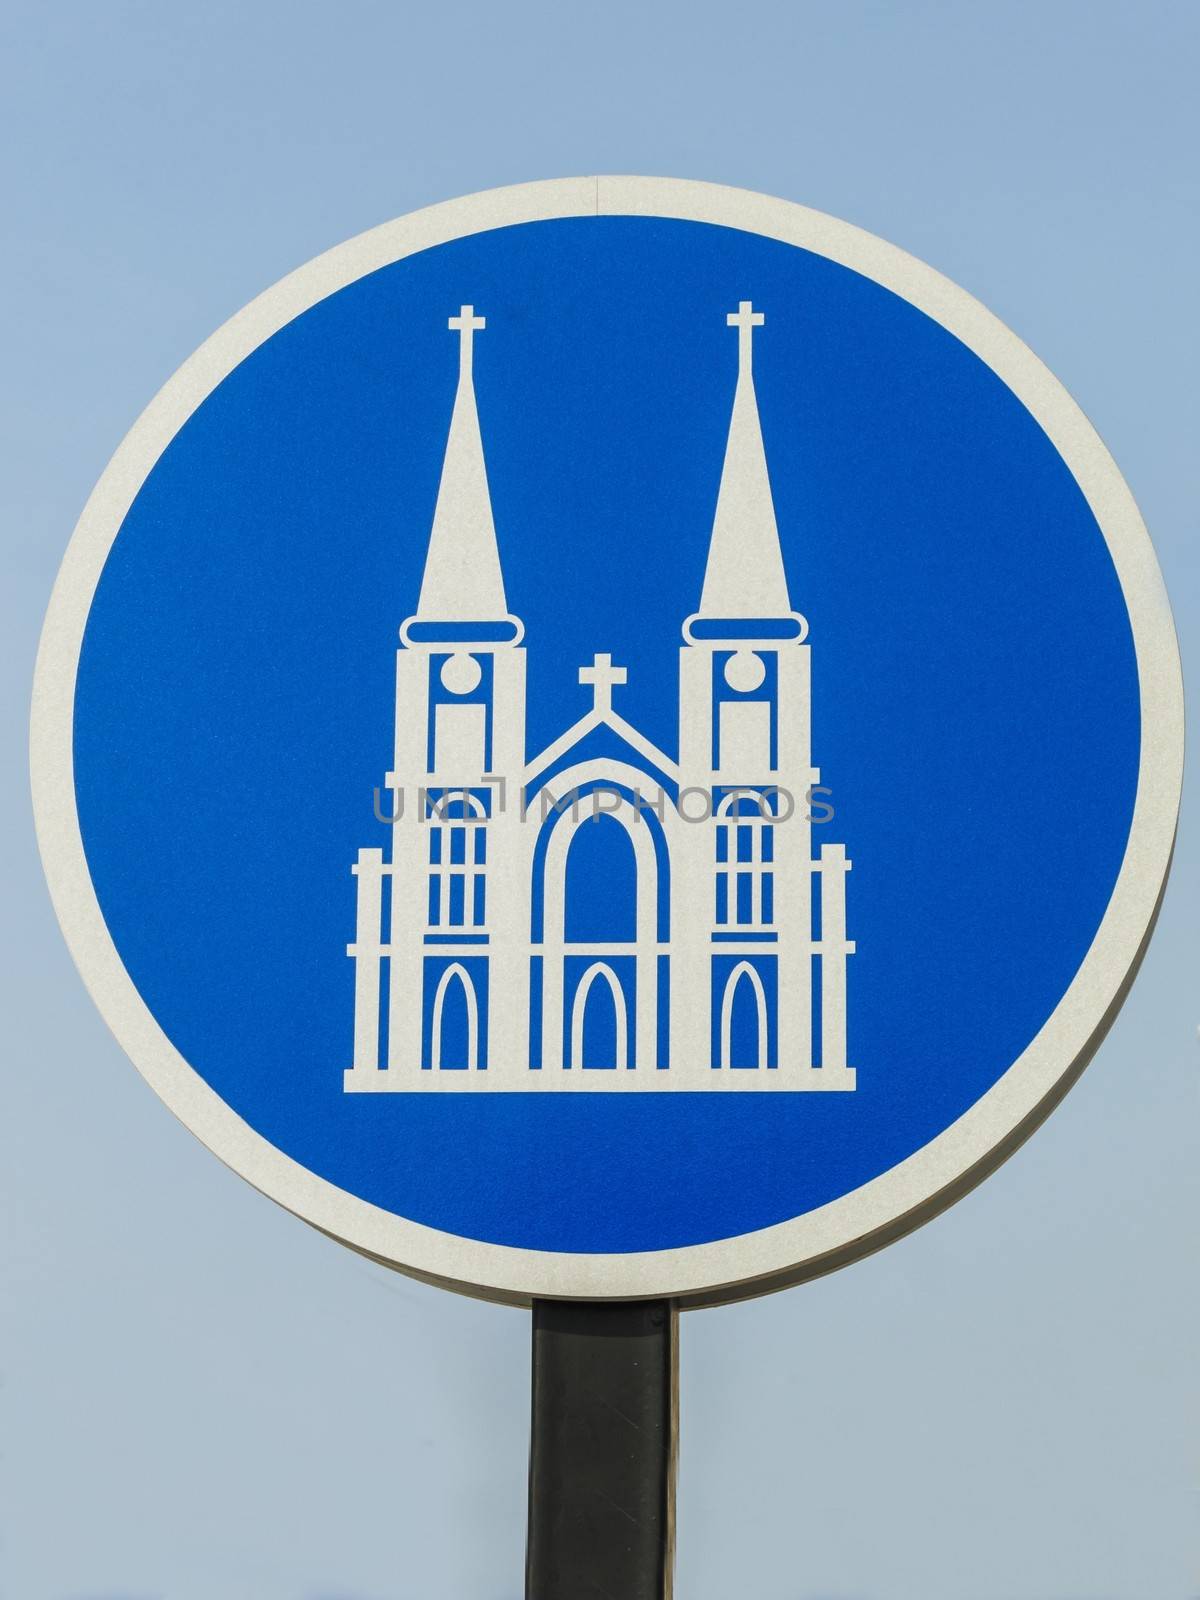 Church Signs in sunny day. by ngungfoto